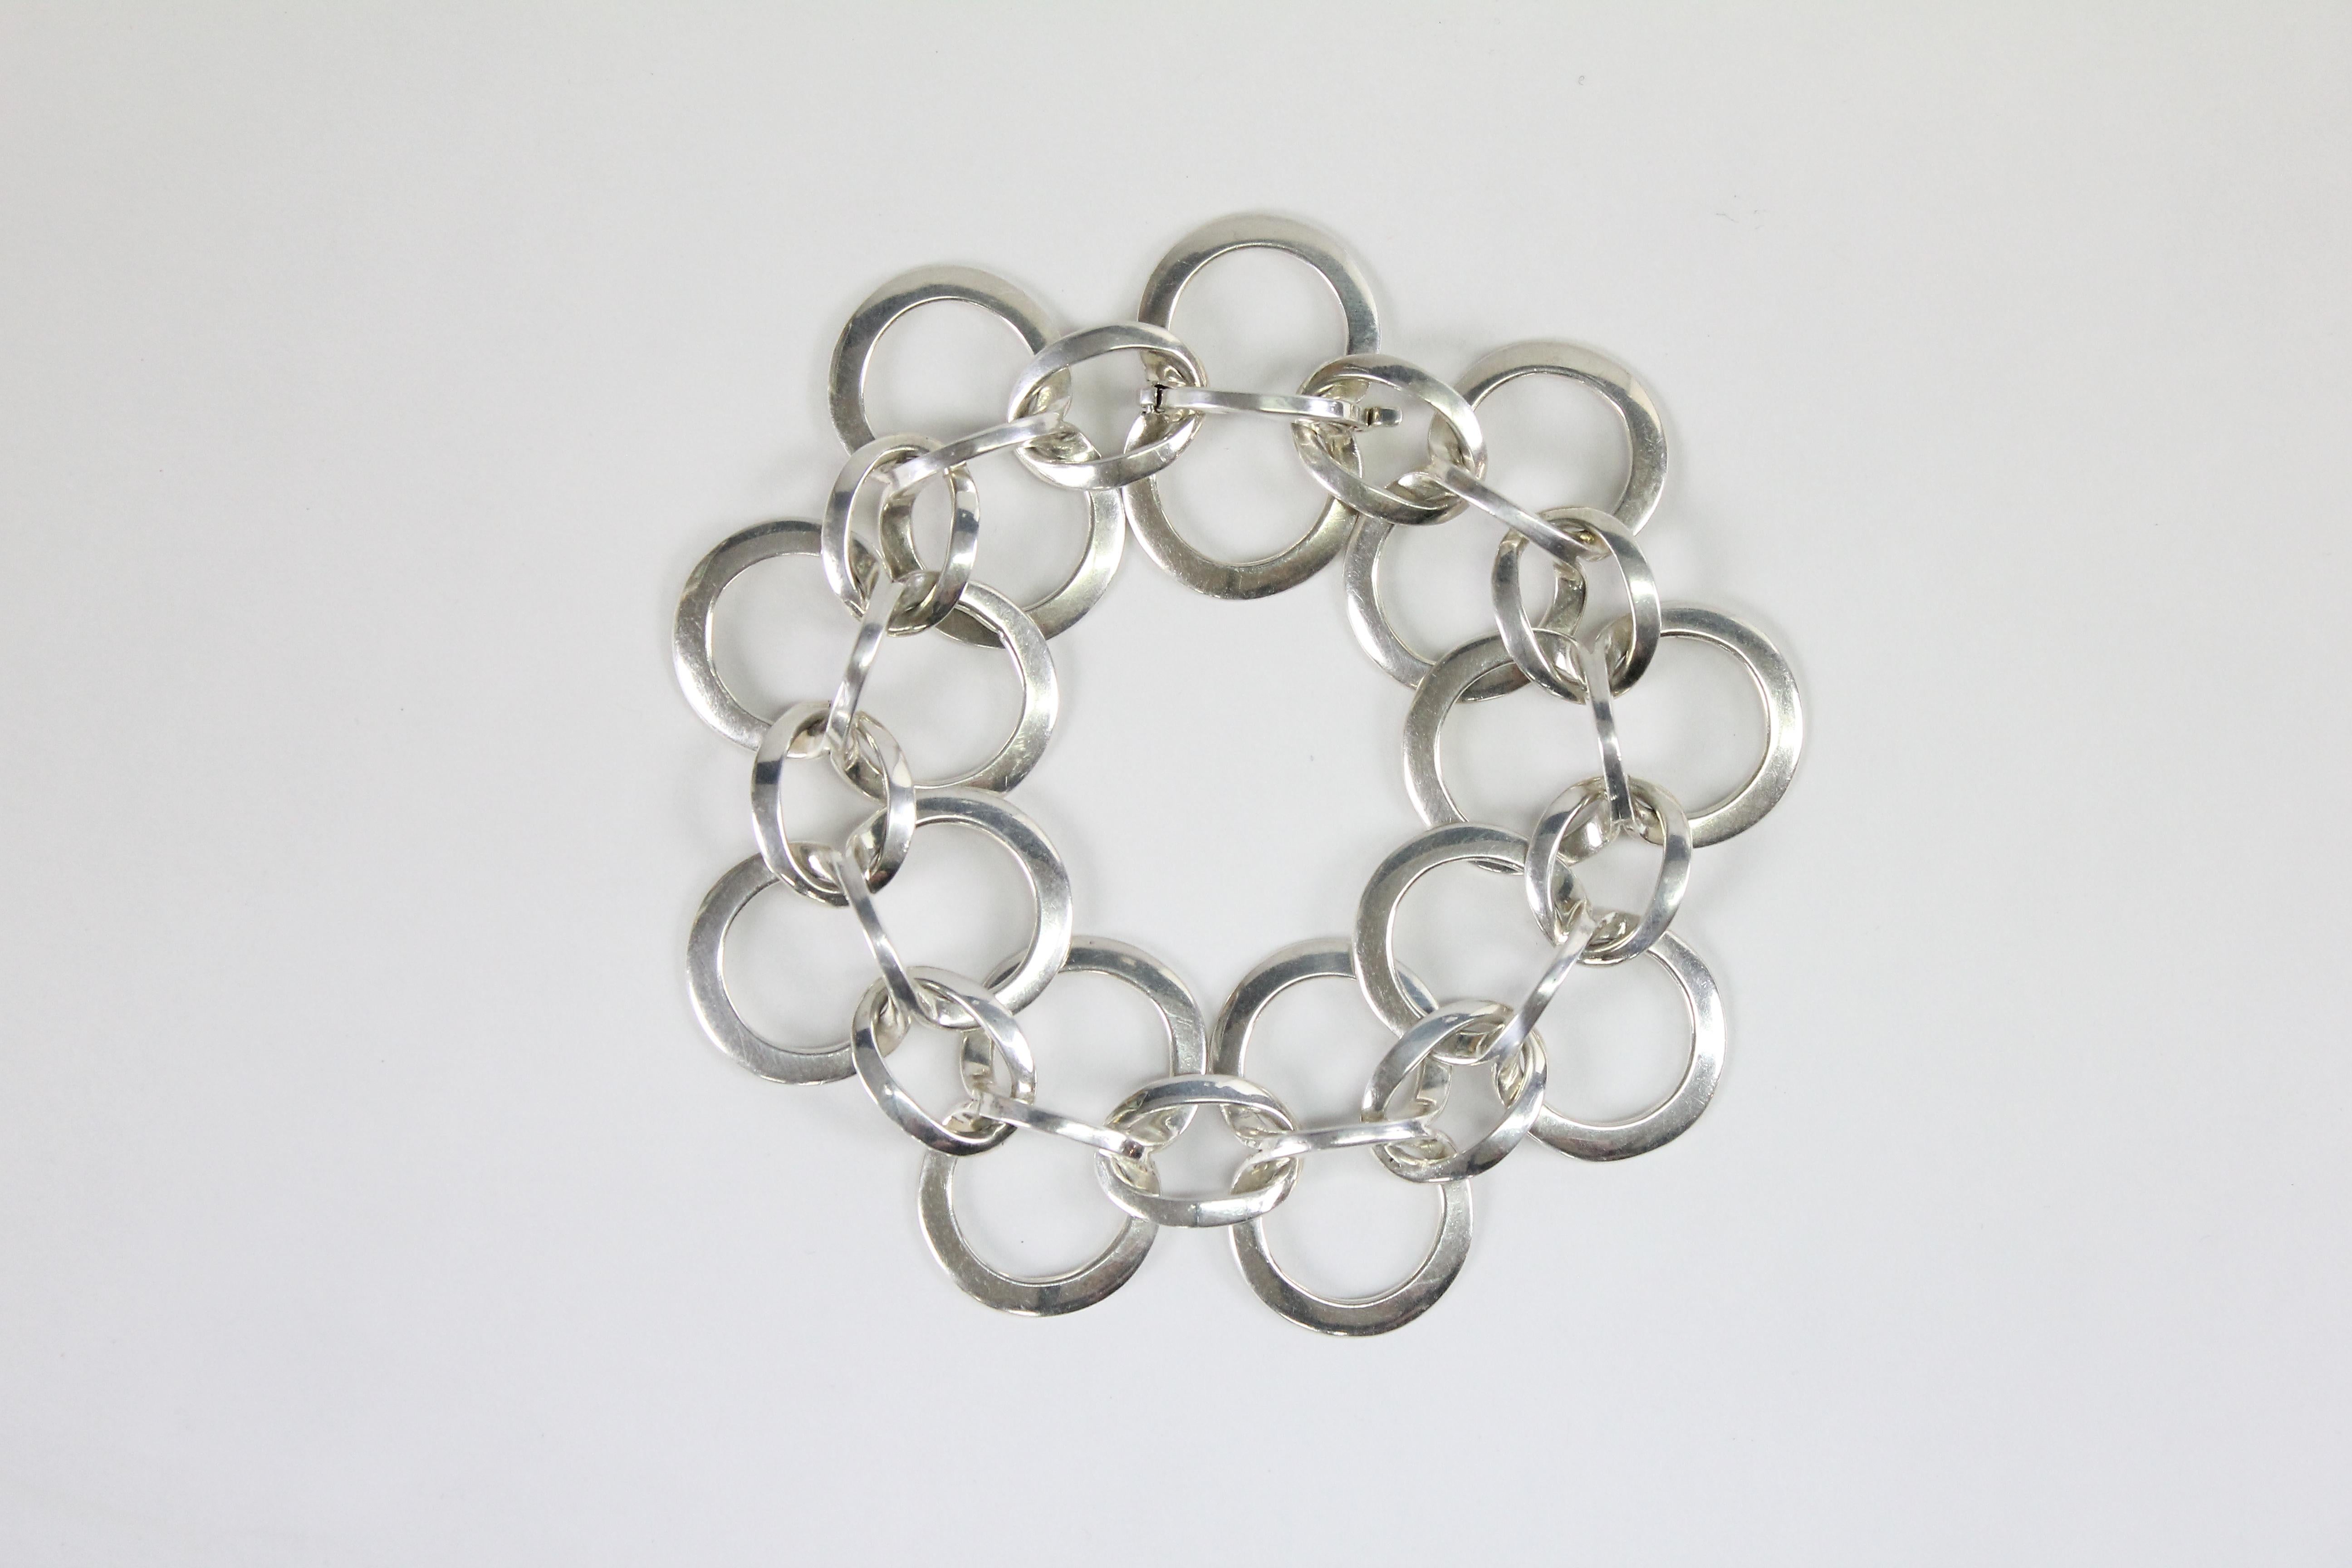 Wonderful modernist bracelet by Swedish designer Stina Sökjer-Peters.
Made in Sterling silver in 1978. Fully marked and with artist signature.

Very nice condition. No issues!

